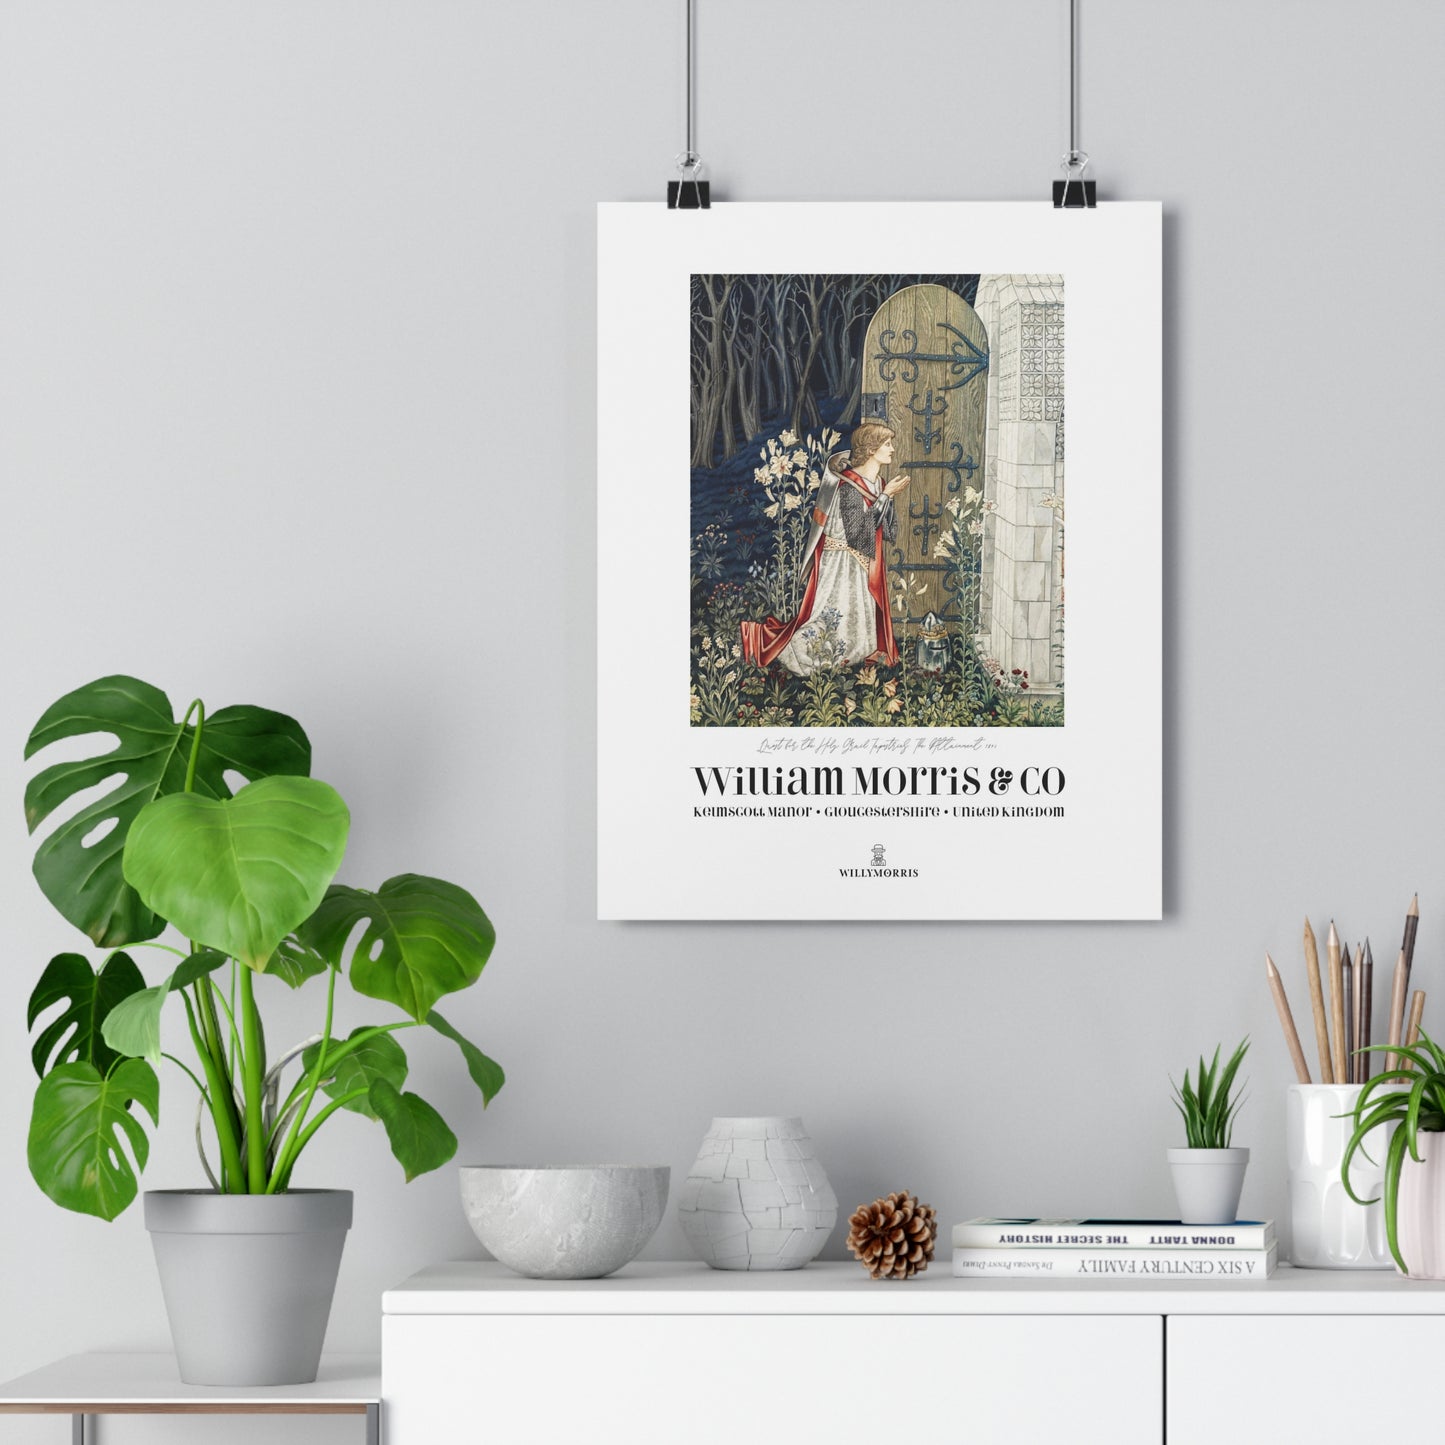 William Morris & Co Giclée Art Print - Quest for the Holy Grail Collection (Door)